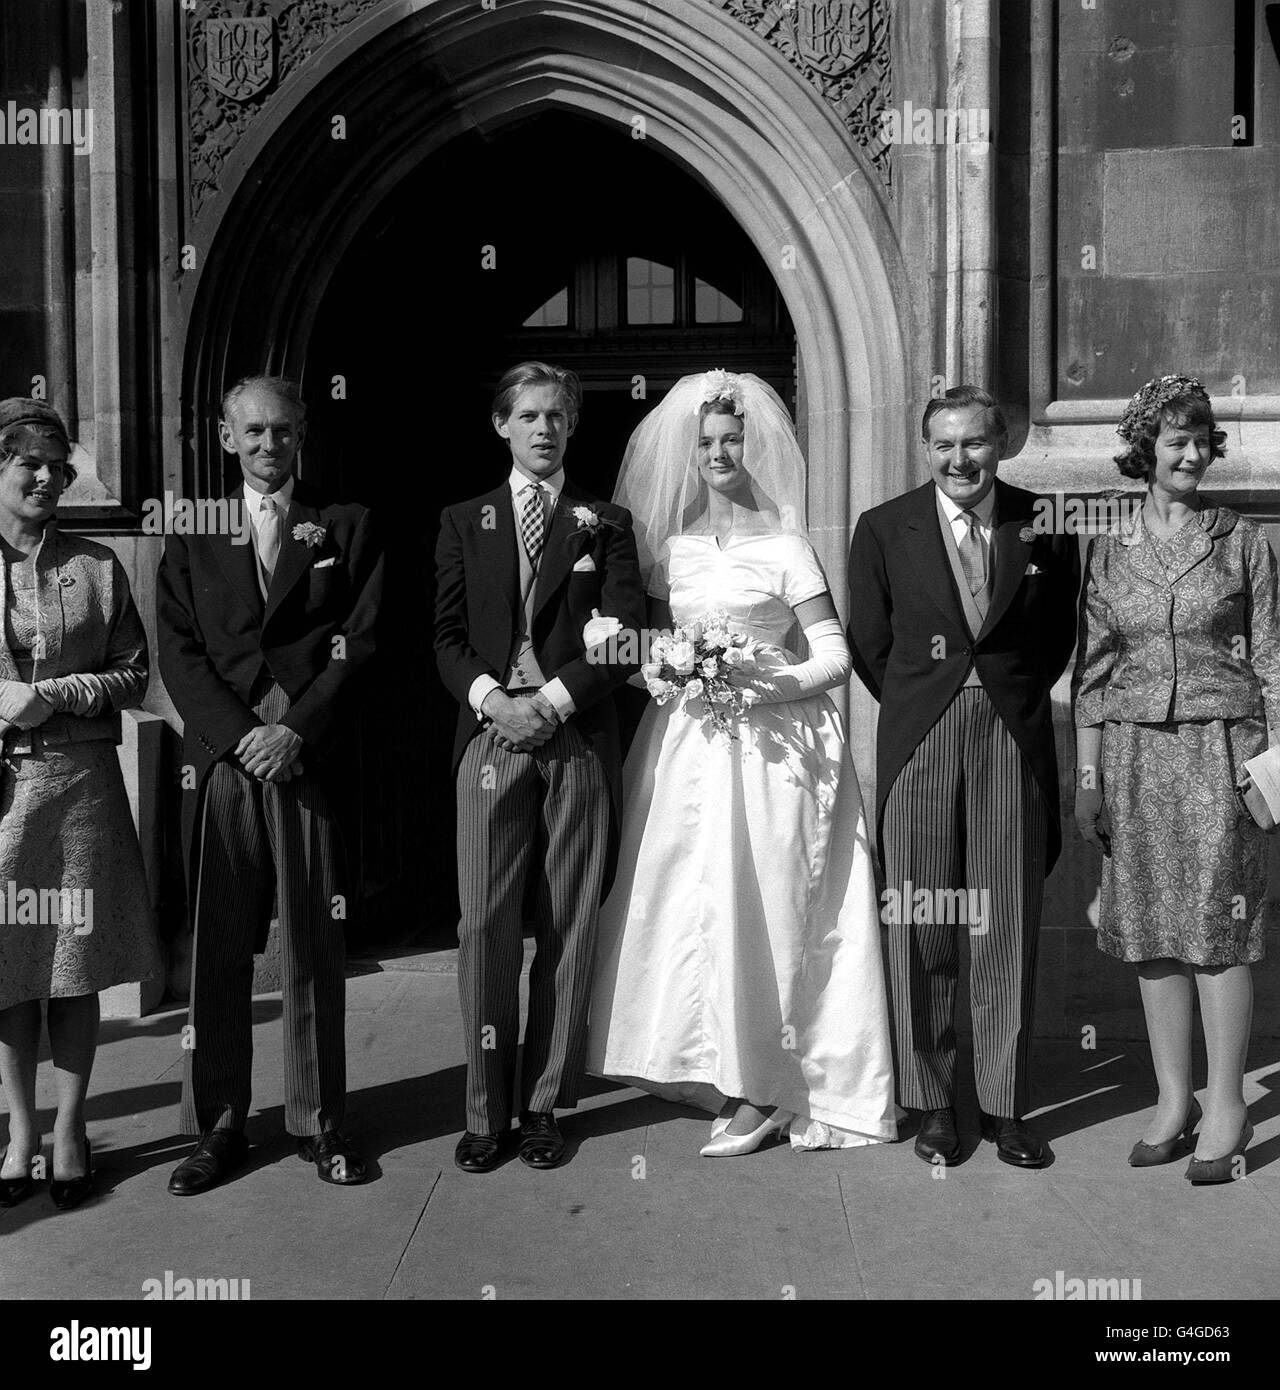 PA NEWS PHOTO 16/9/61  PETER JAY WEDDING TO MARGARET ANN CALLAGHAN AT THE HOUSE OF COMMONS CRYPT IN WESTMINSTER, LONDON. WITH THE BRIDE AND GROOM FROM LEFT IS DOUGLAS JAY (FATHER OF GROOM) AND RIGHT JAMES CALLAGHAN (FATHER OF BRIDE) Stock Photo